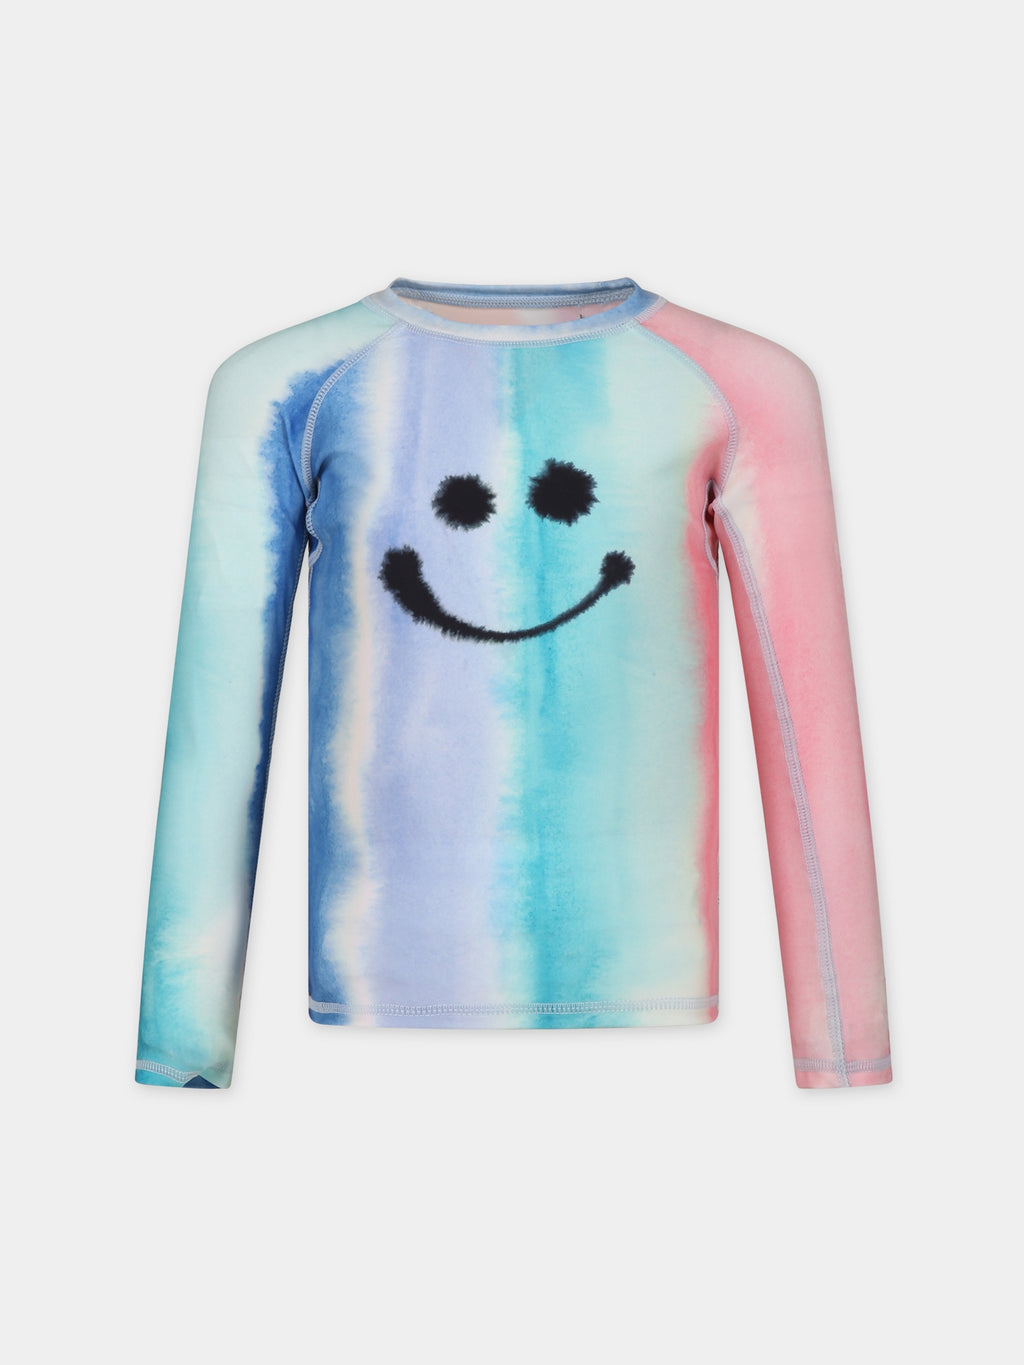 Multicolor t-shirt for kids with smiley